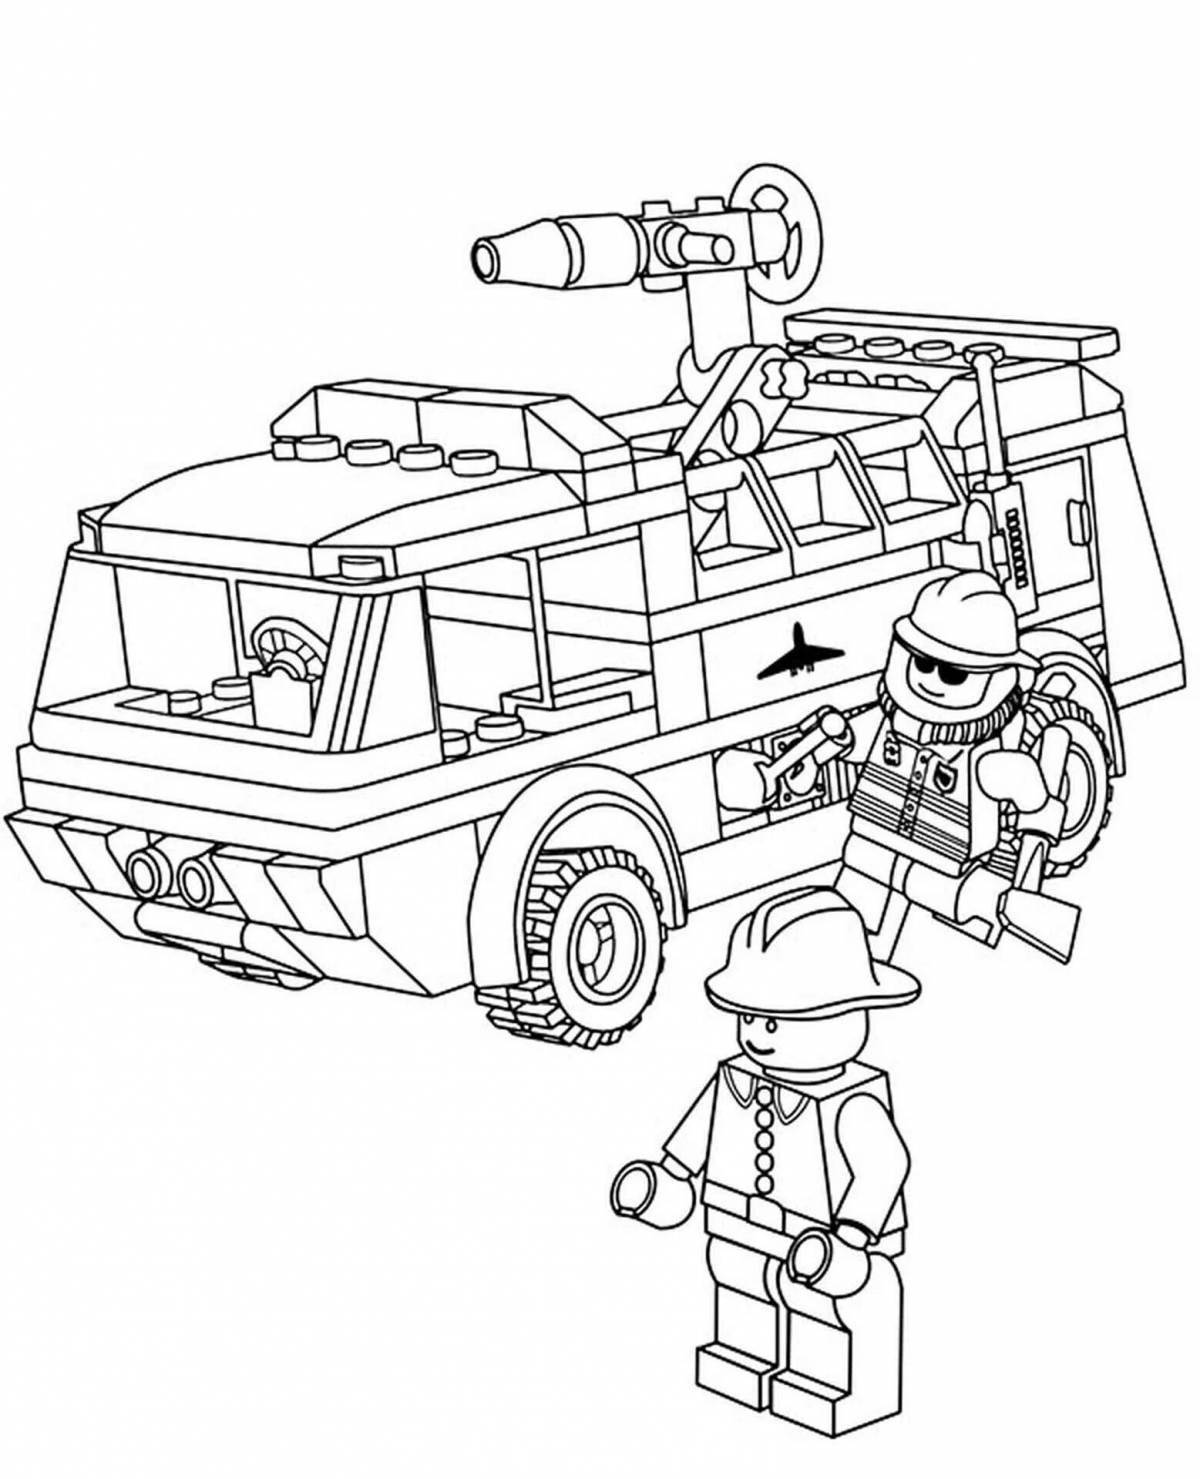 Decorated police ship coloring page